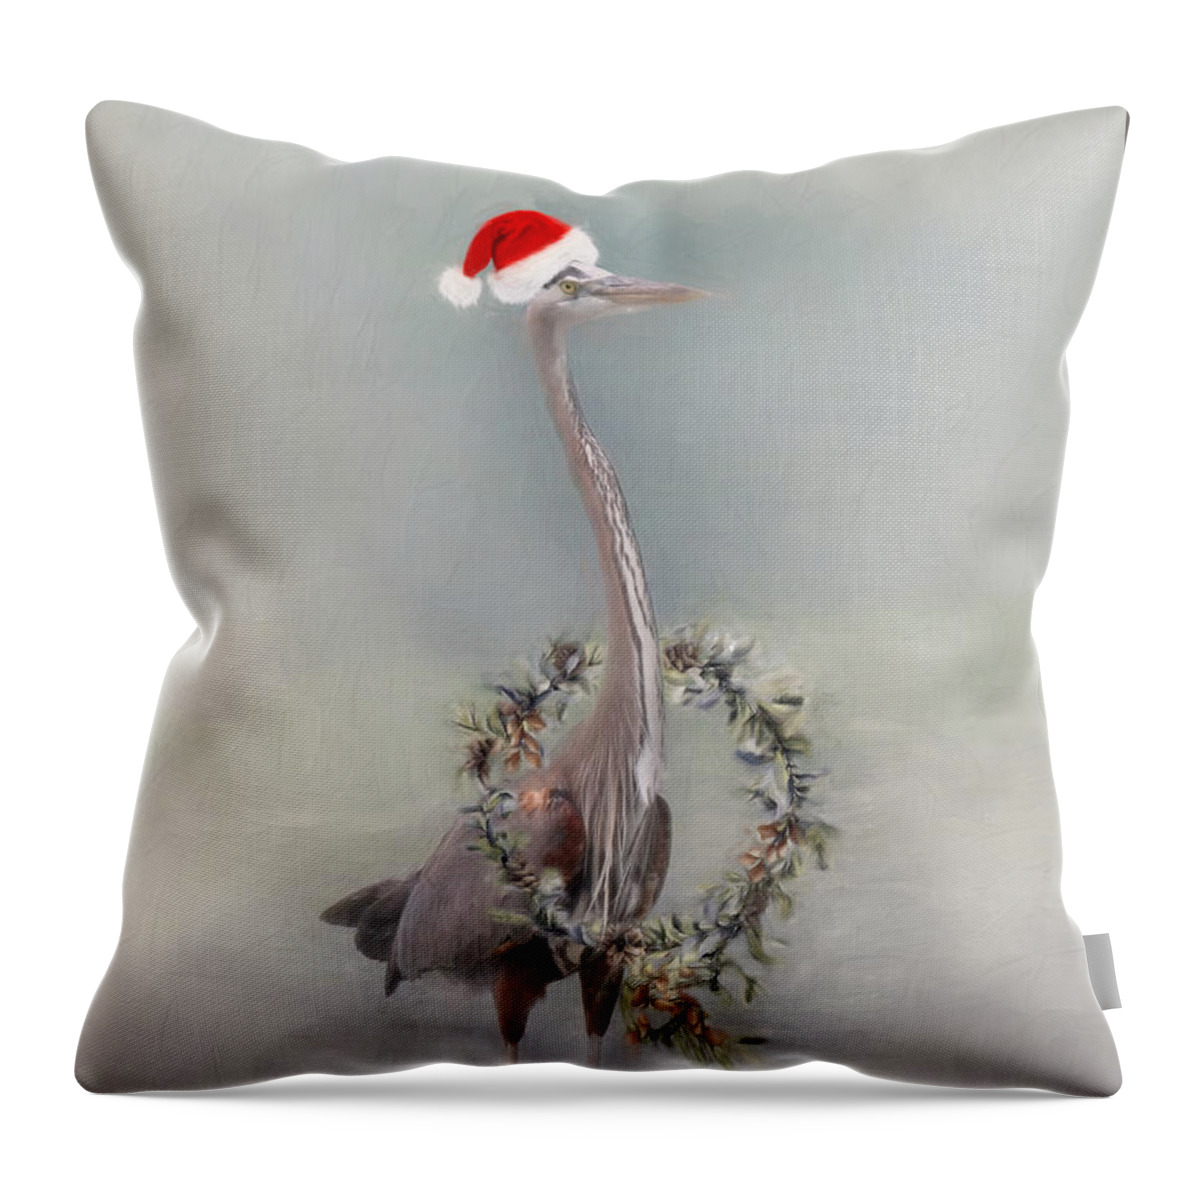 Heron With Santa Hat Throw Pillow featuring the digital art Holiday Heron by Jayne Carney